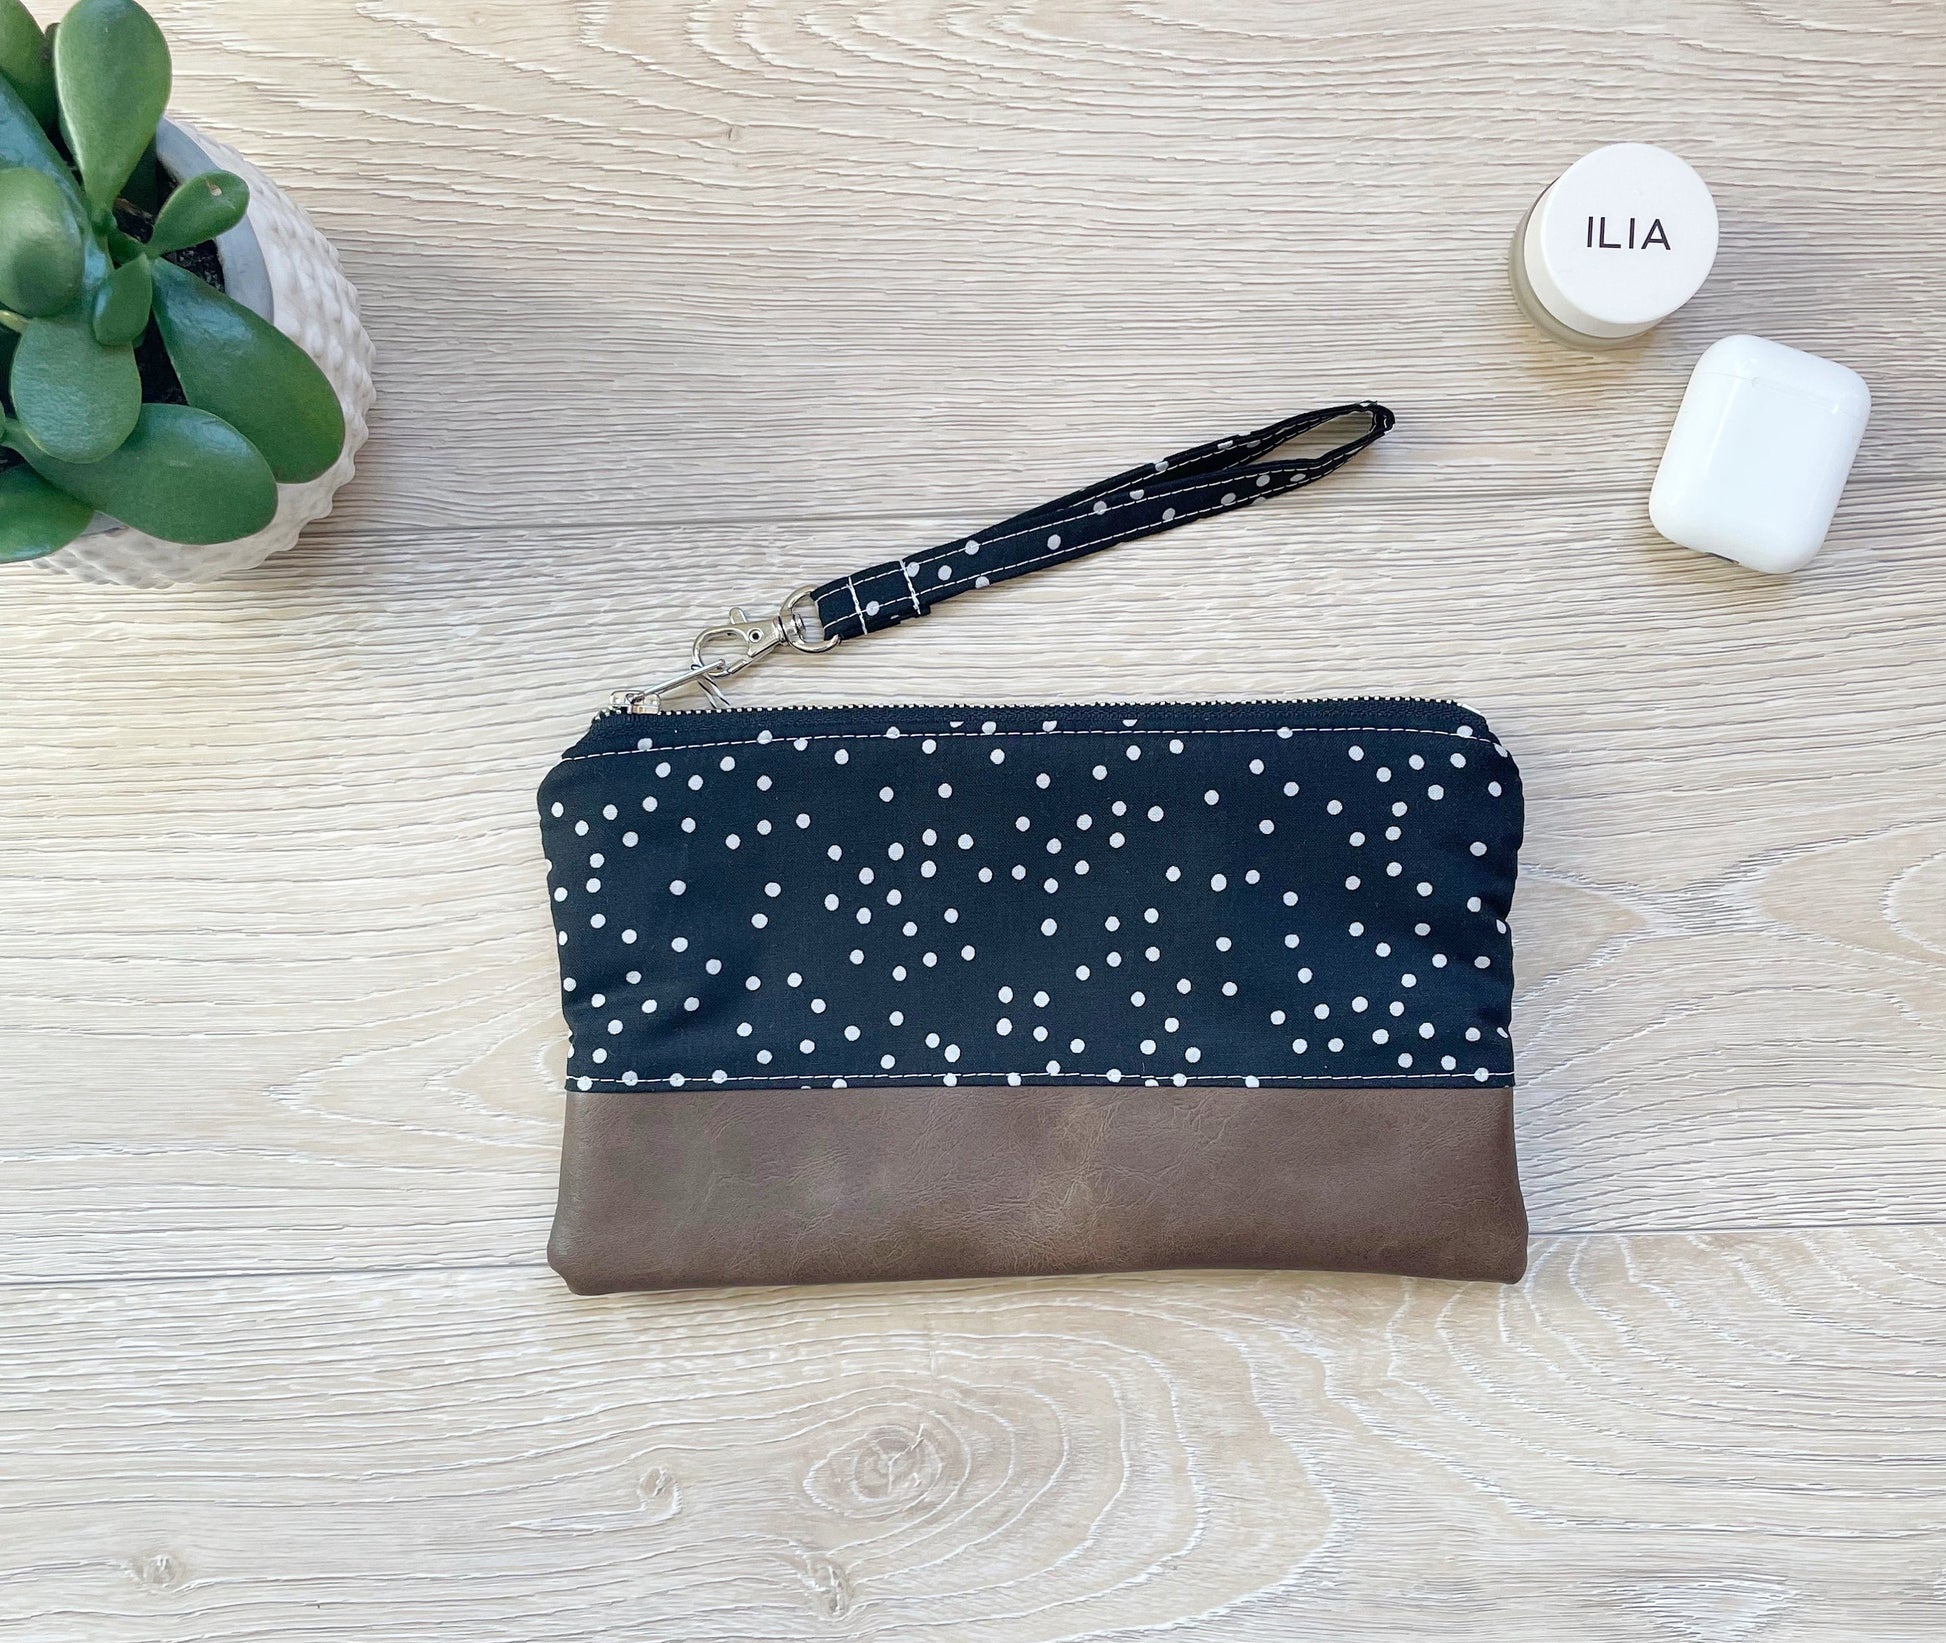 black and gray dot wristlet with silver zipper and brown vinyl along bottom of clutch. matching black and gray dot wrist strap